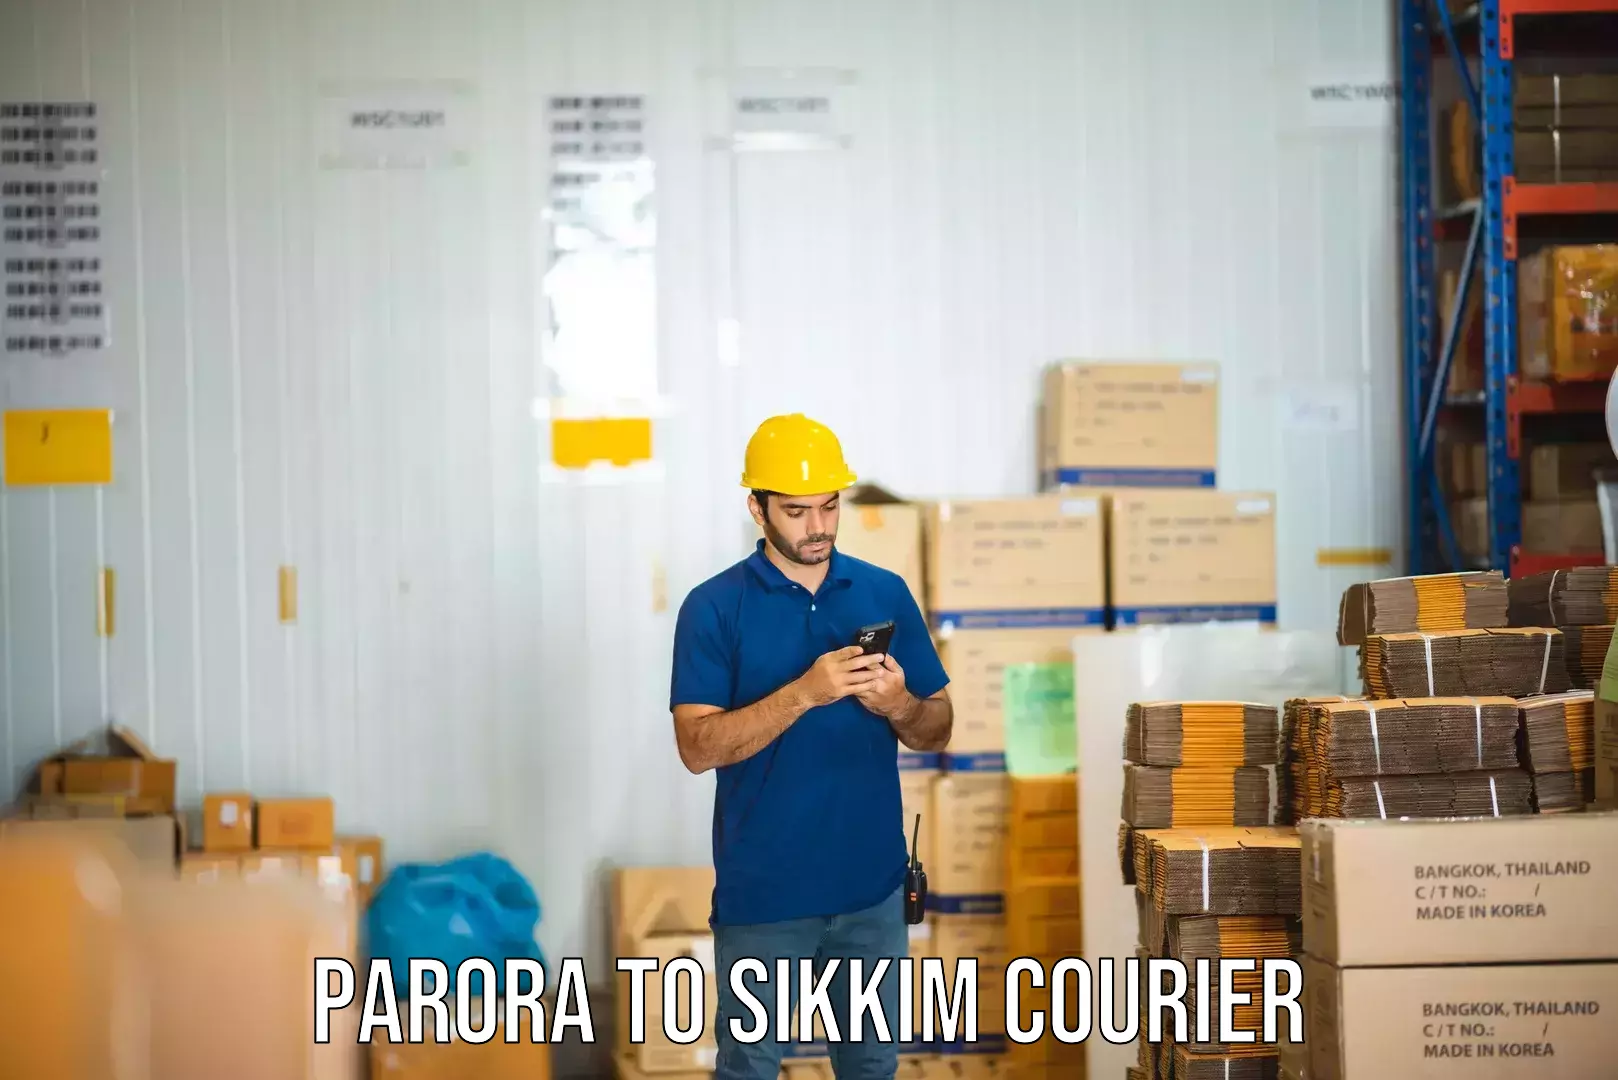 Secure packaging in Parora to Sikkim